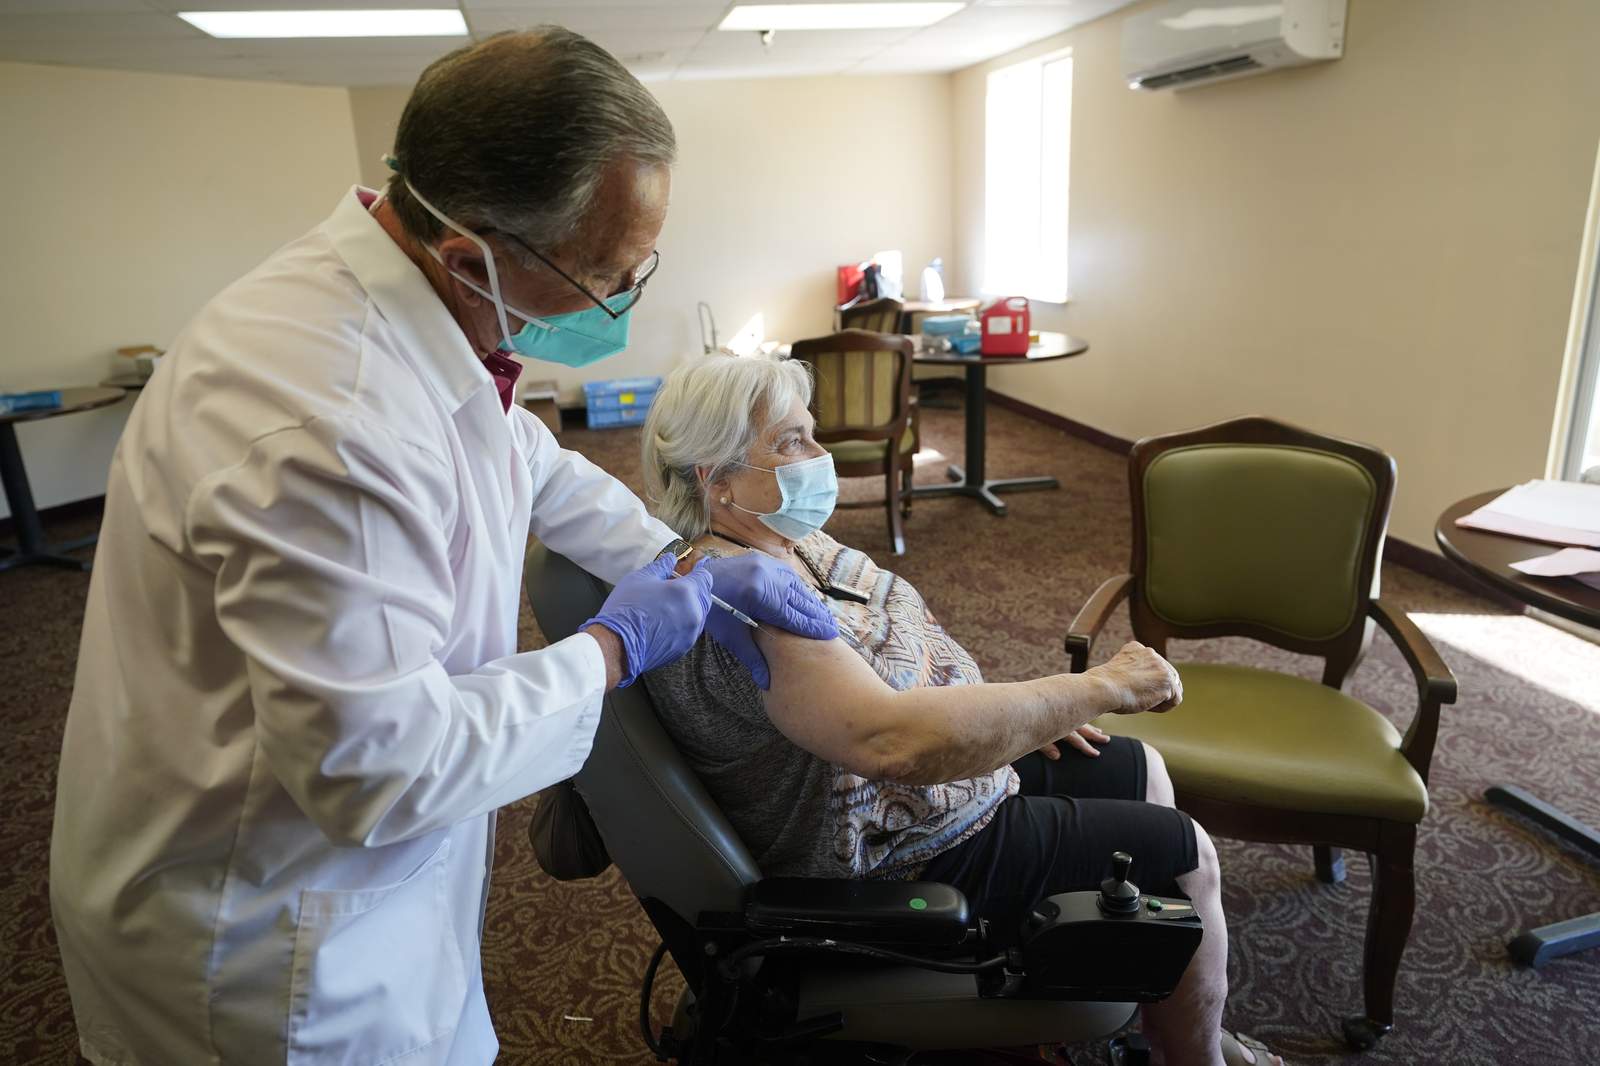 Race to inoculate long-term care facilities faces challenges as Florida surpasses 27,000 COVID-19 deaths